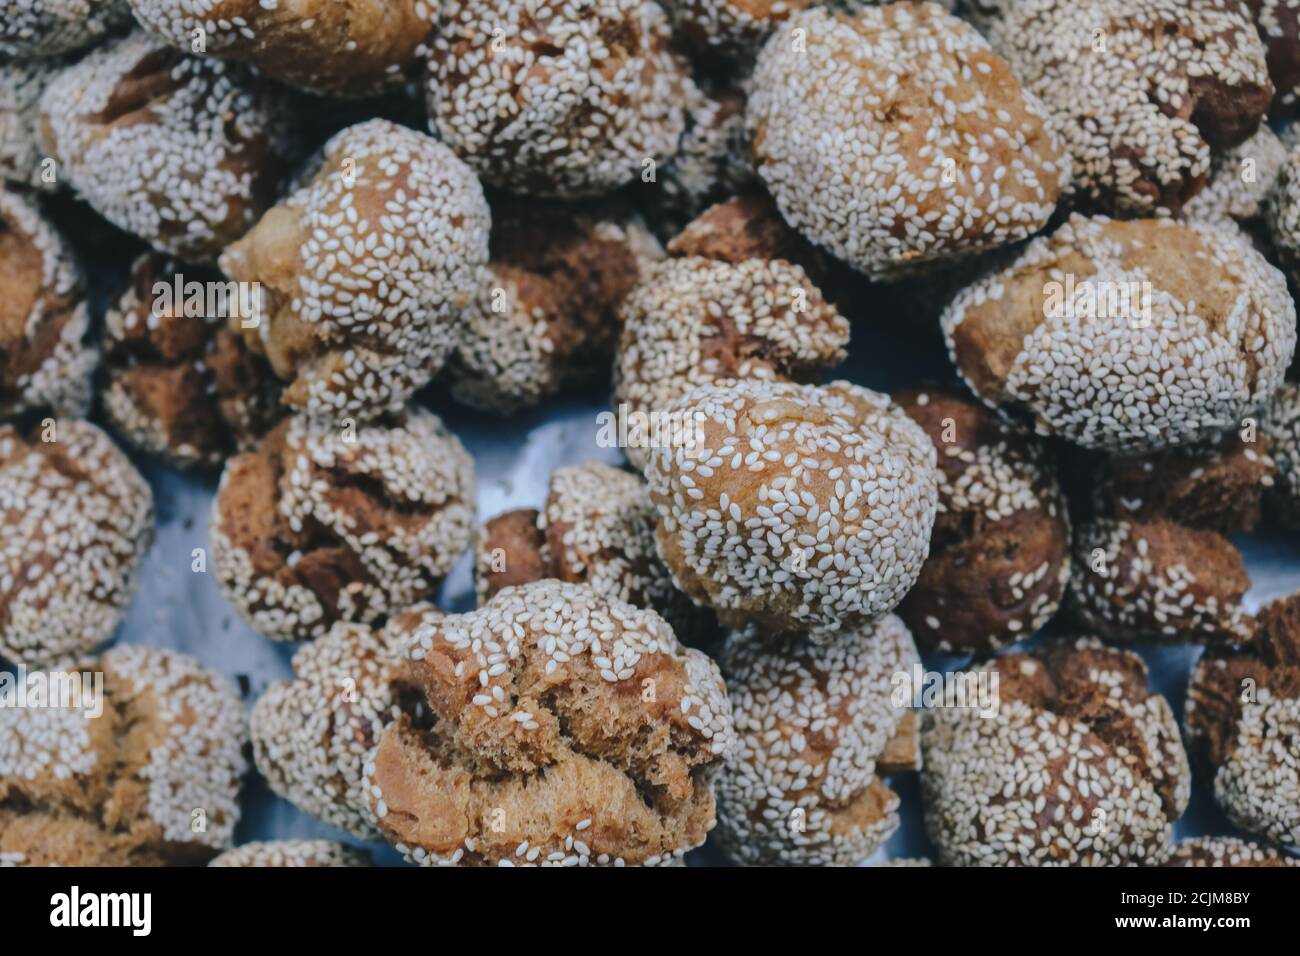 Onde onde, Indonesian Traditional snack. made from wheat flour mixing sticky rice flour and sesame seeds as toping. Stock Photo